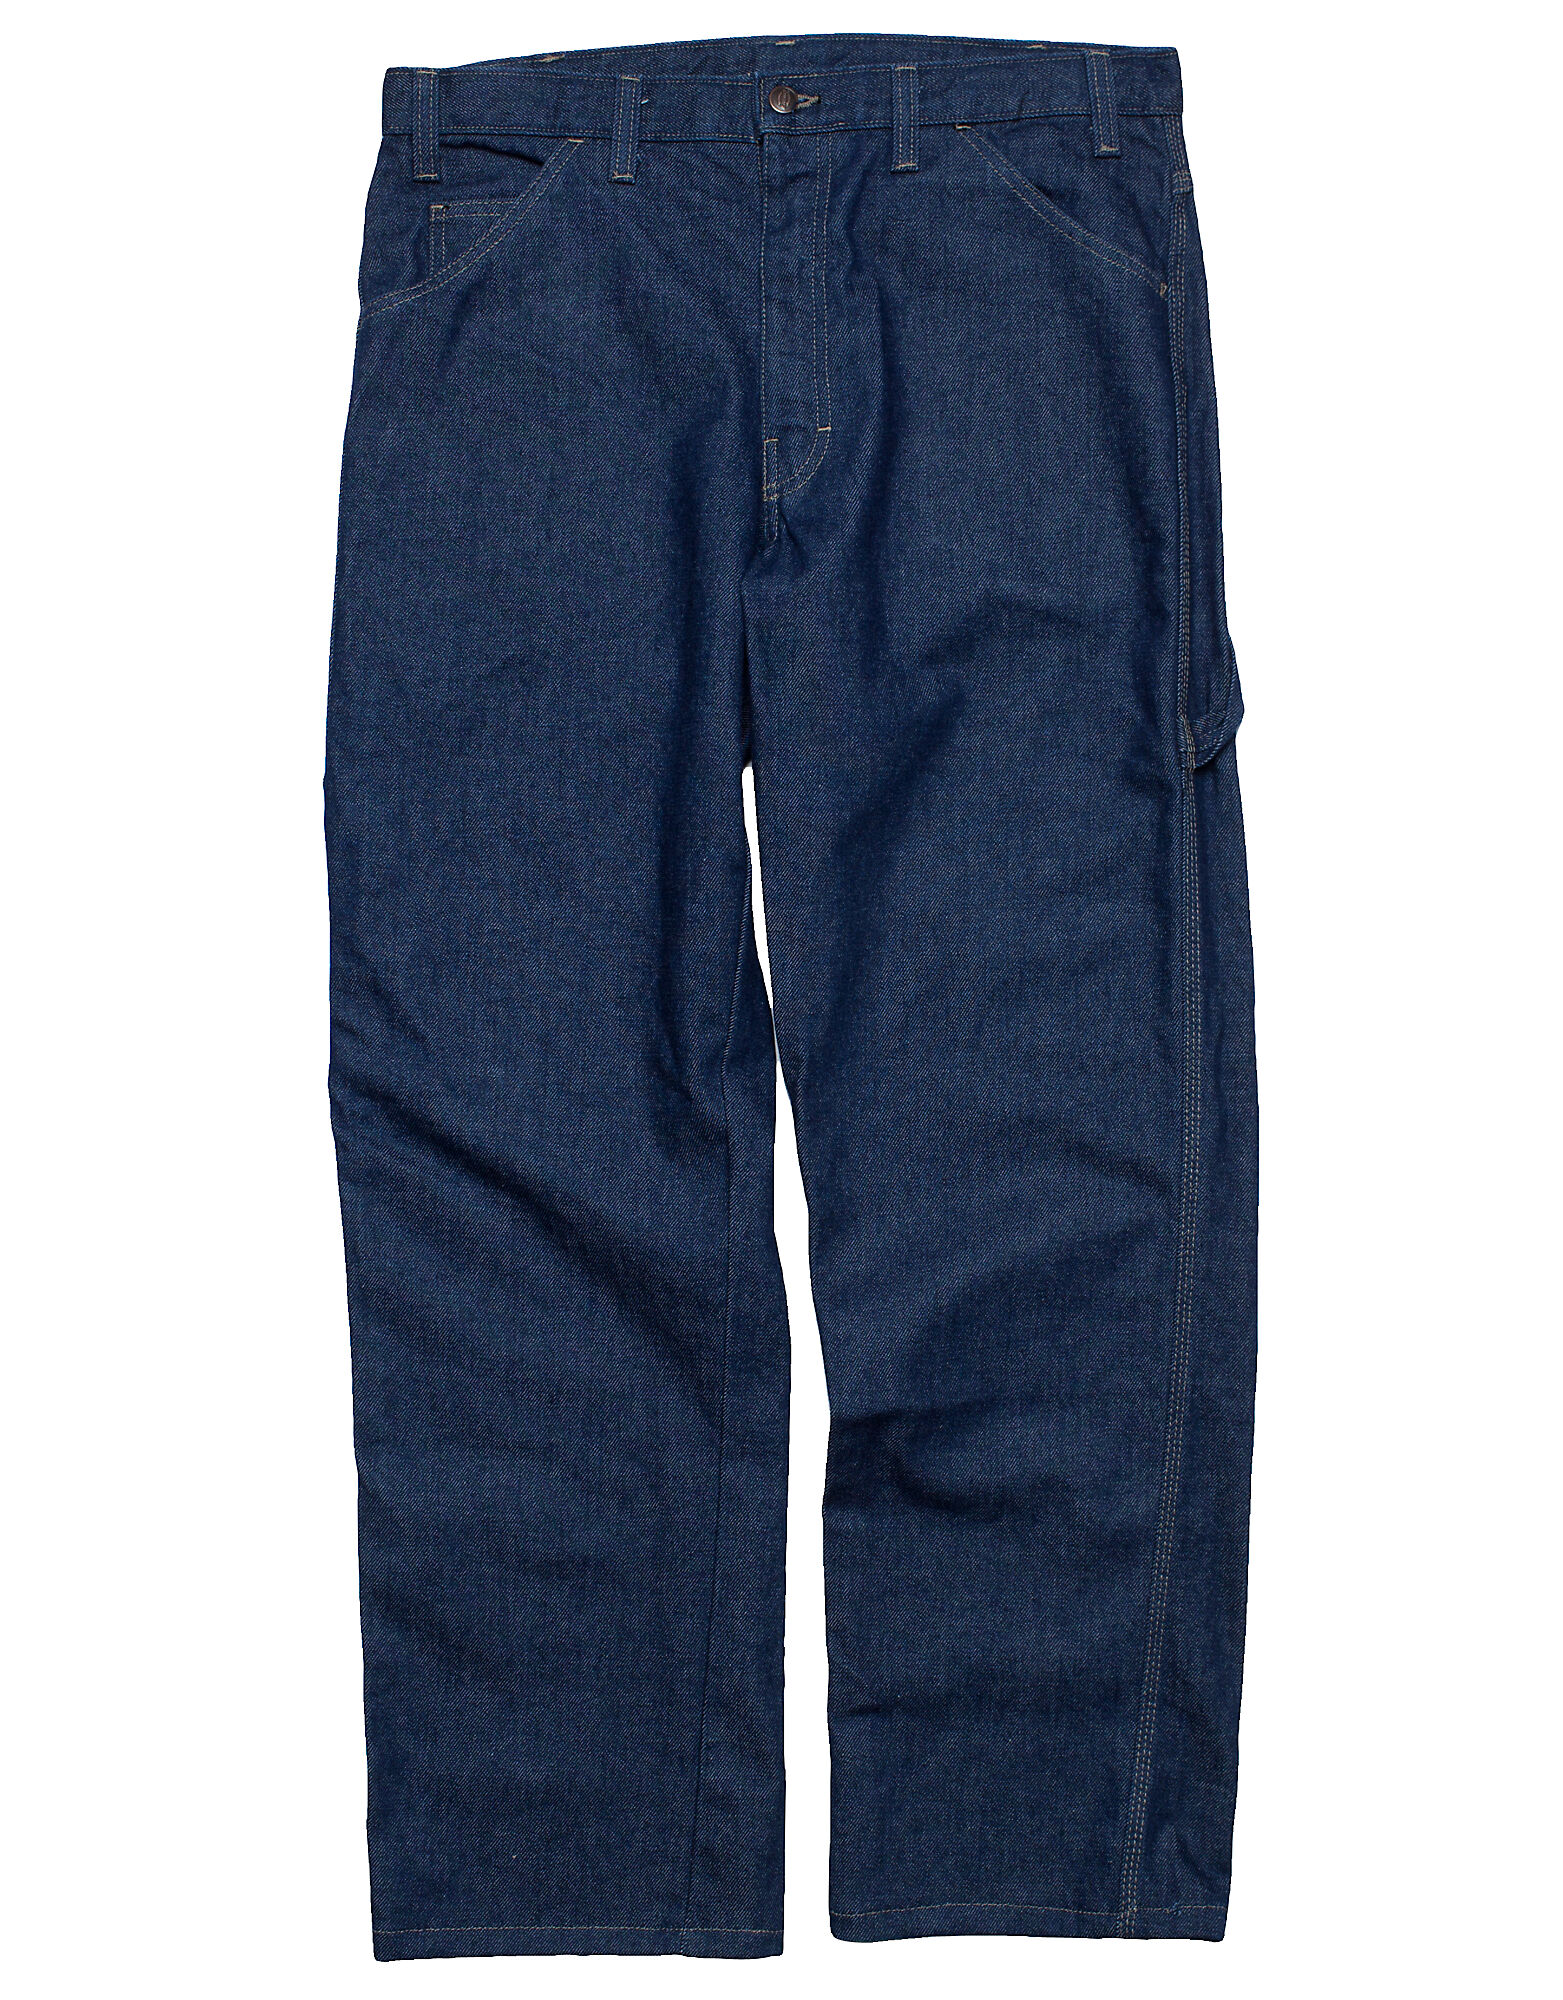 14 oz. Indura and Dickies FR Relaxed Fit Carpenter Jean | Mens Flame ...